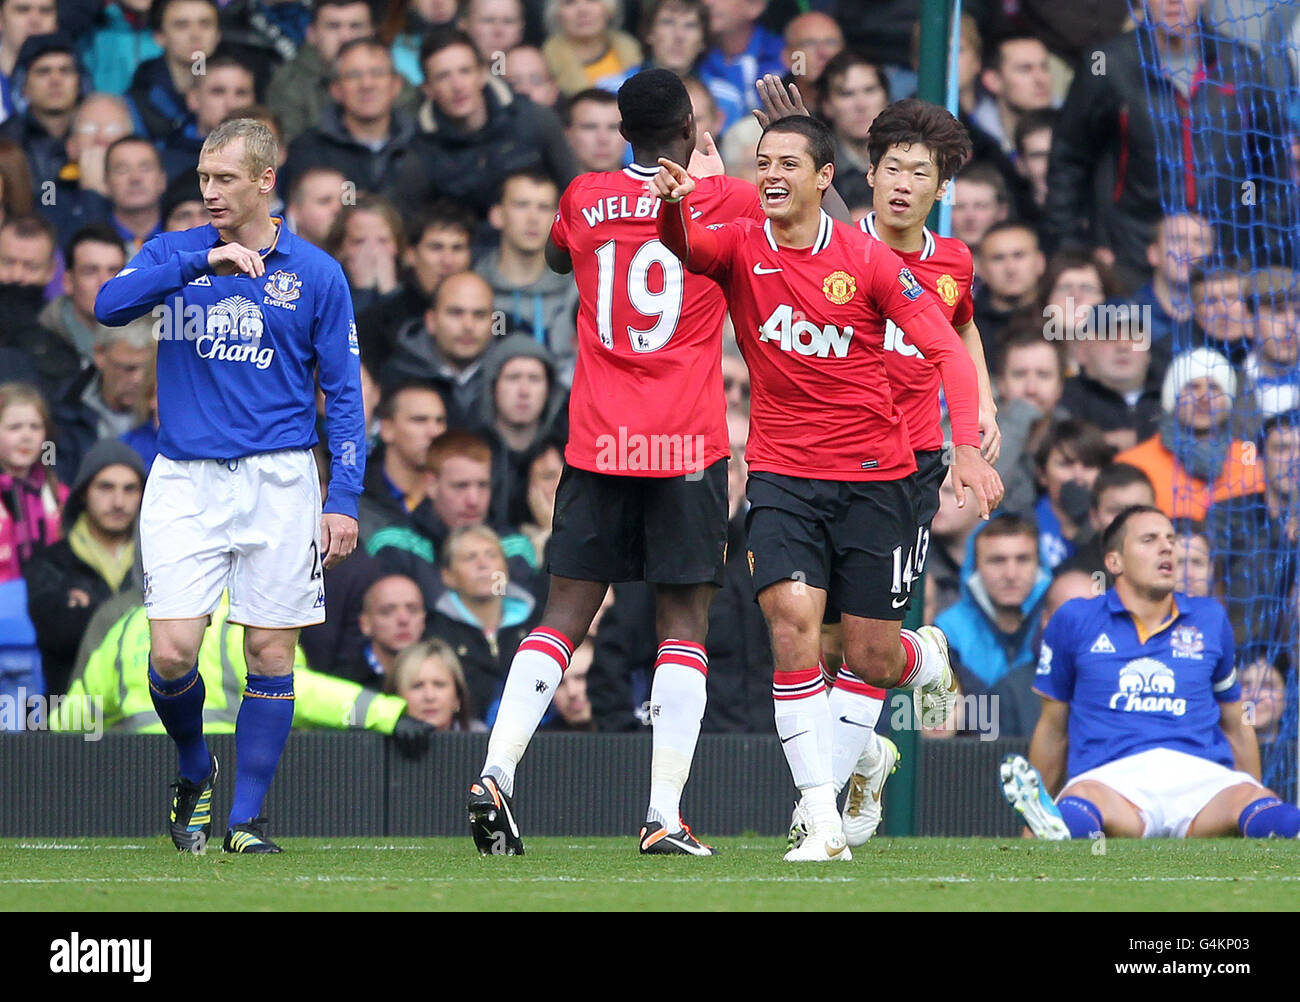 Soccer - Barclays Premier League - Everton v Manchester United - Goodison Park. Manchester United's Javier Hernandez celebrates scoring the first goal of the game Stock Photo